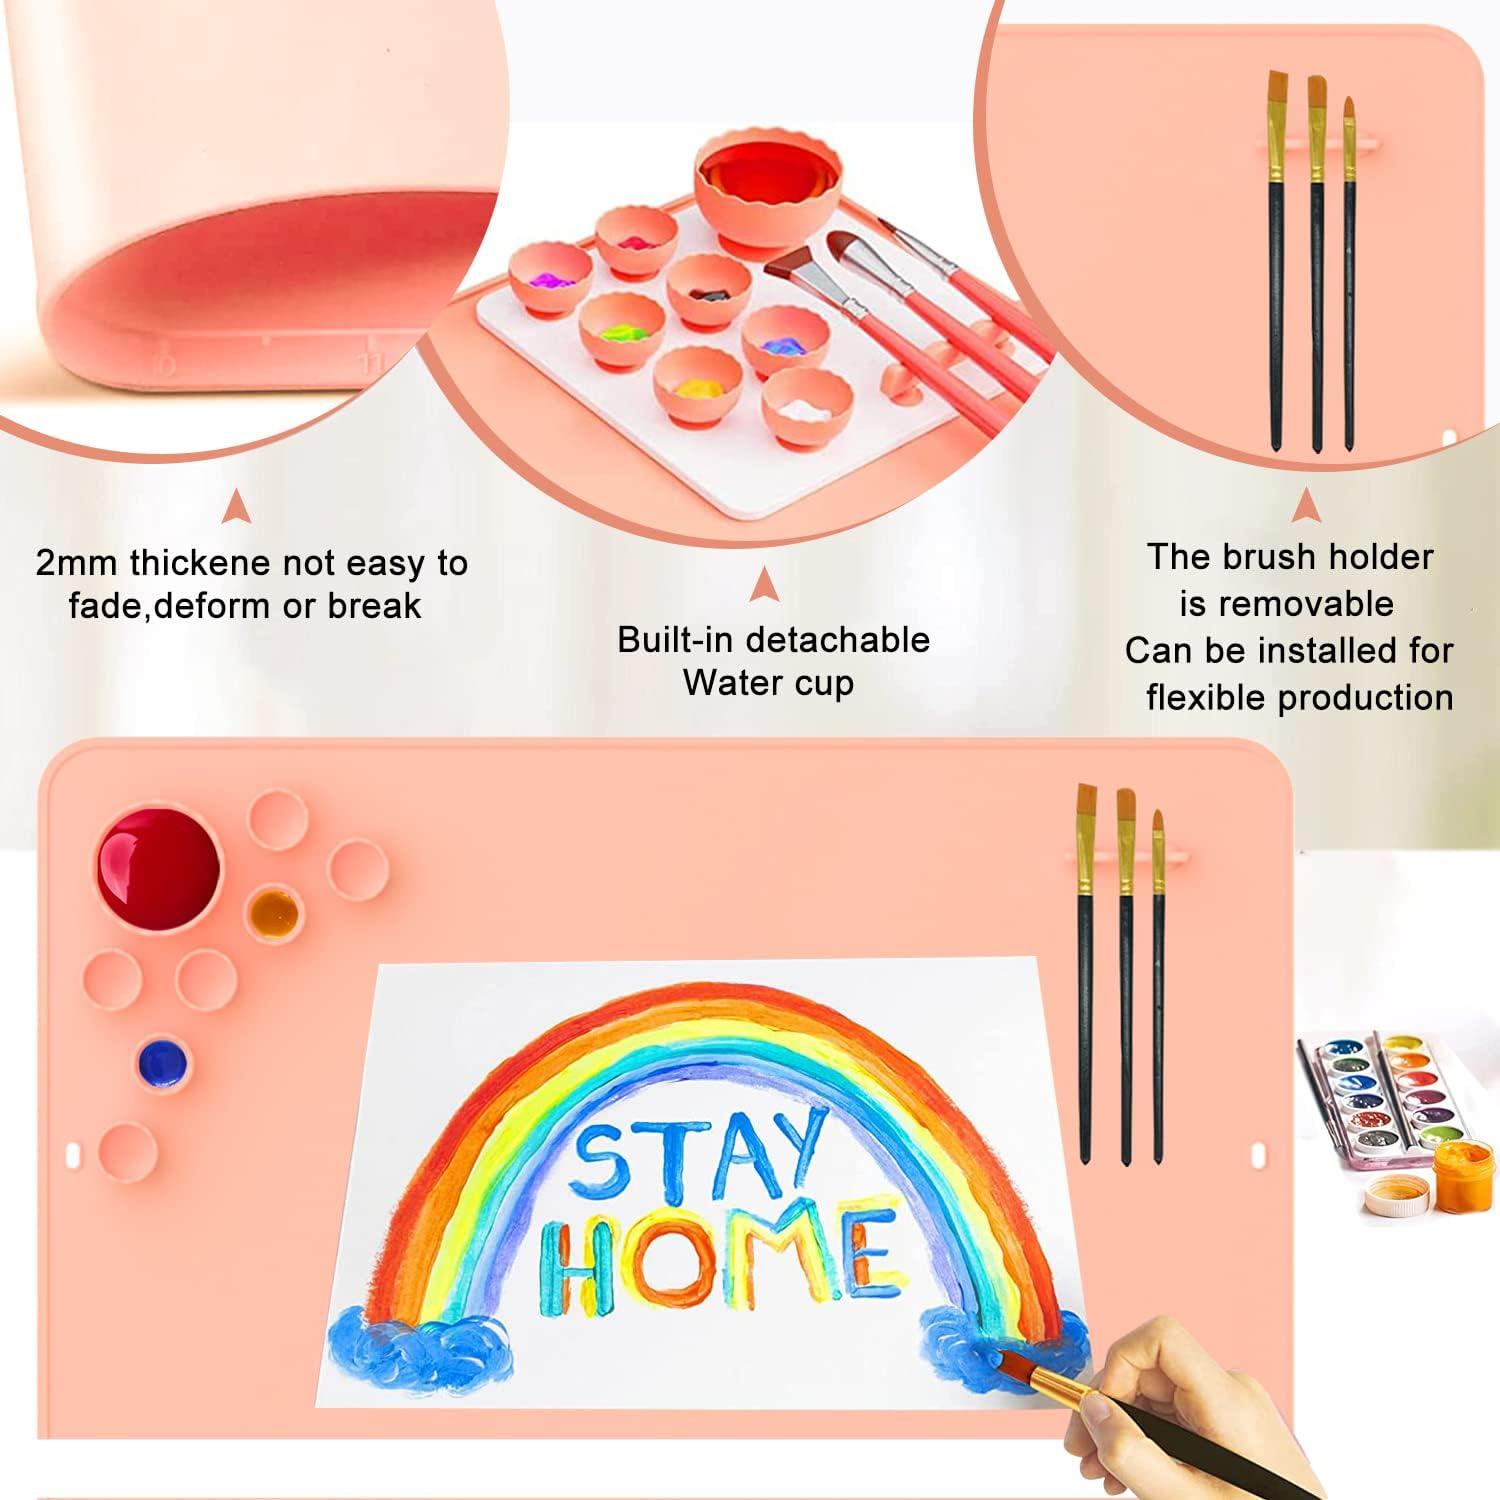 GAWYSBM Silicone Painting Mat for Kids, Silicone Craft Mat with Cup and Paint Holder, 24x16 Silicone Art Mat for Painting Art Clay DIY, and Play